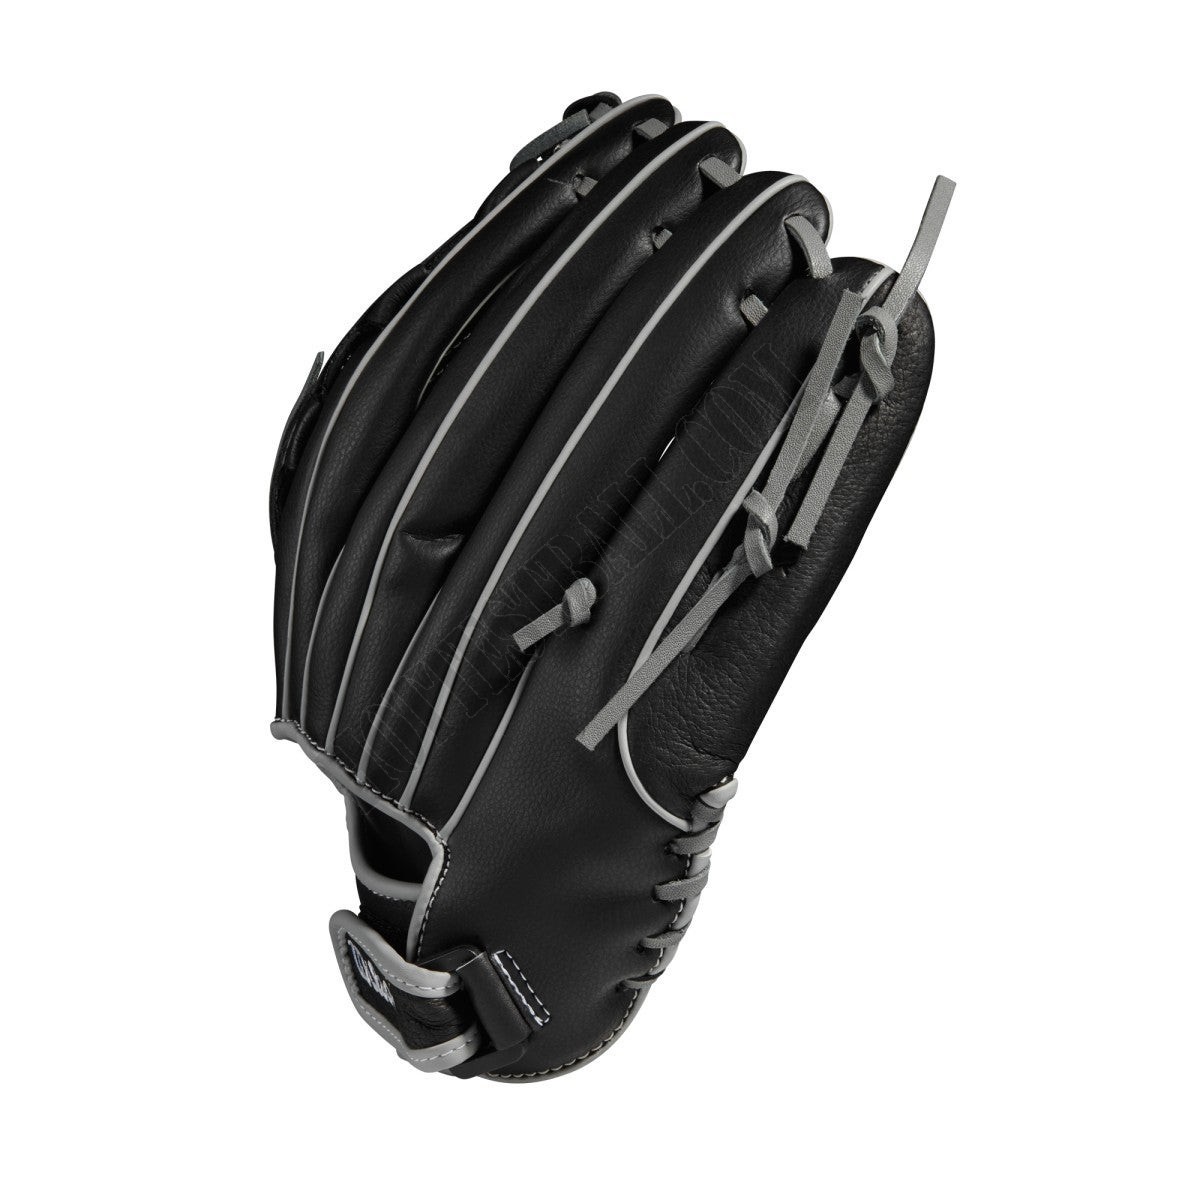 A360 13" Slowpitch Glove - Left Hand Throw ● Wilson Promotions - -8